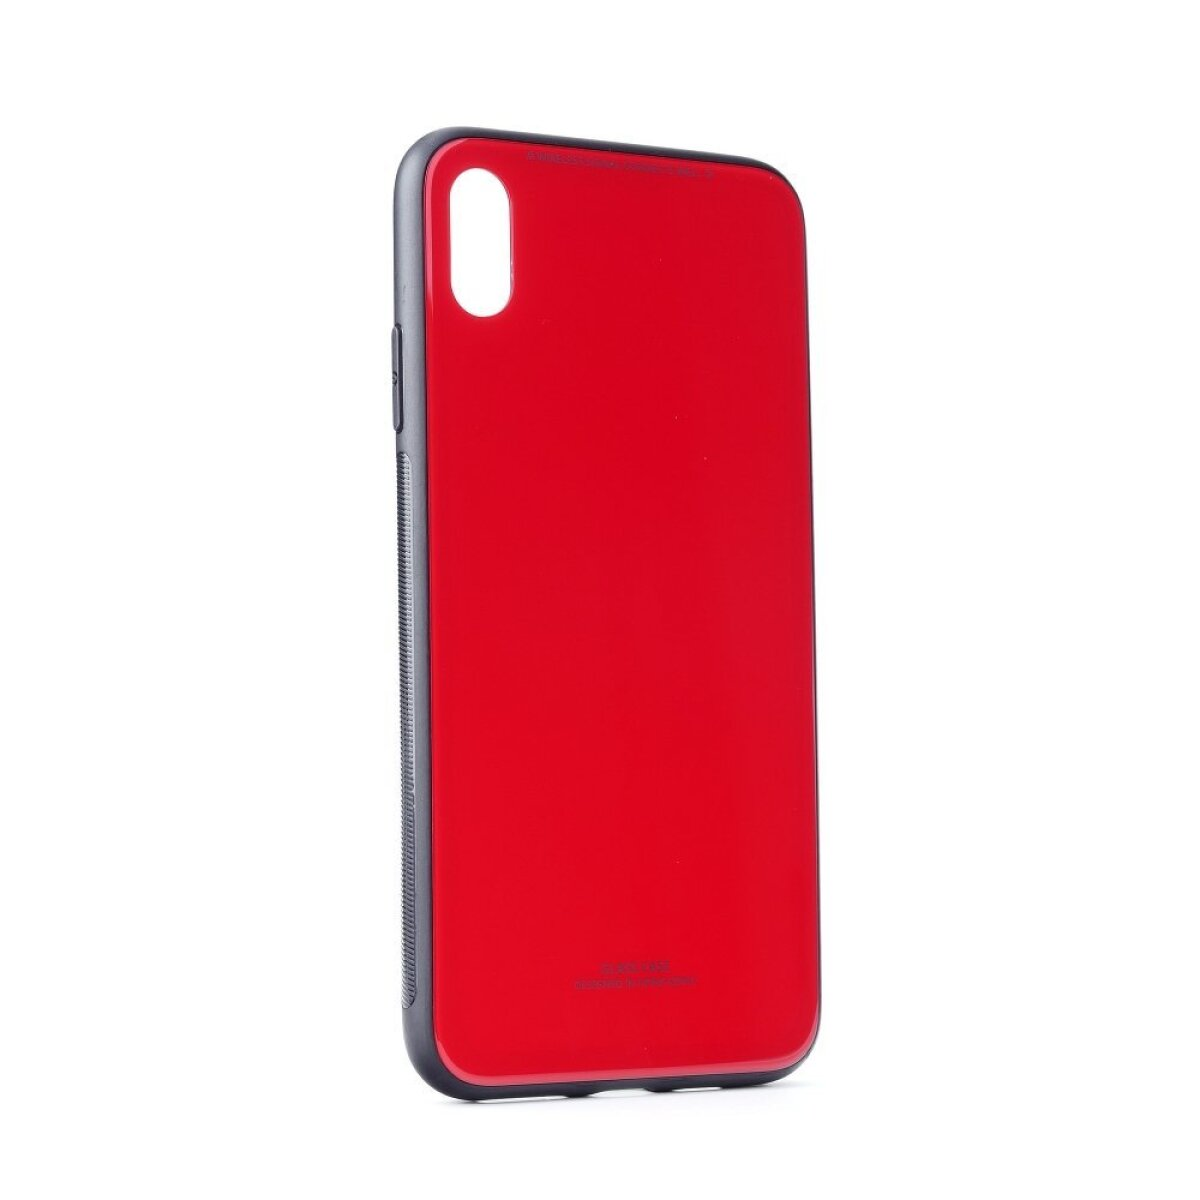 FORCELL GLASS CASE iPhone 11 Apple, schwarz/rot, Pro Pro Bookcover, Max Max, Rot Schwarz; iPhone 11